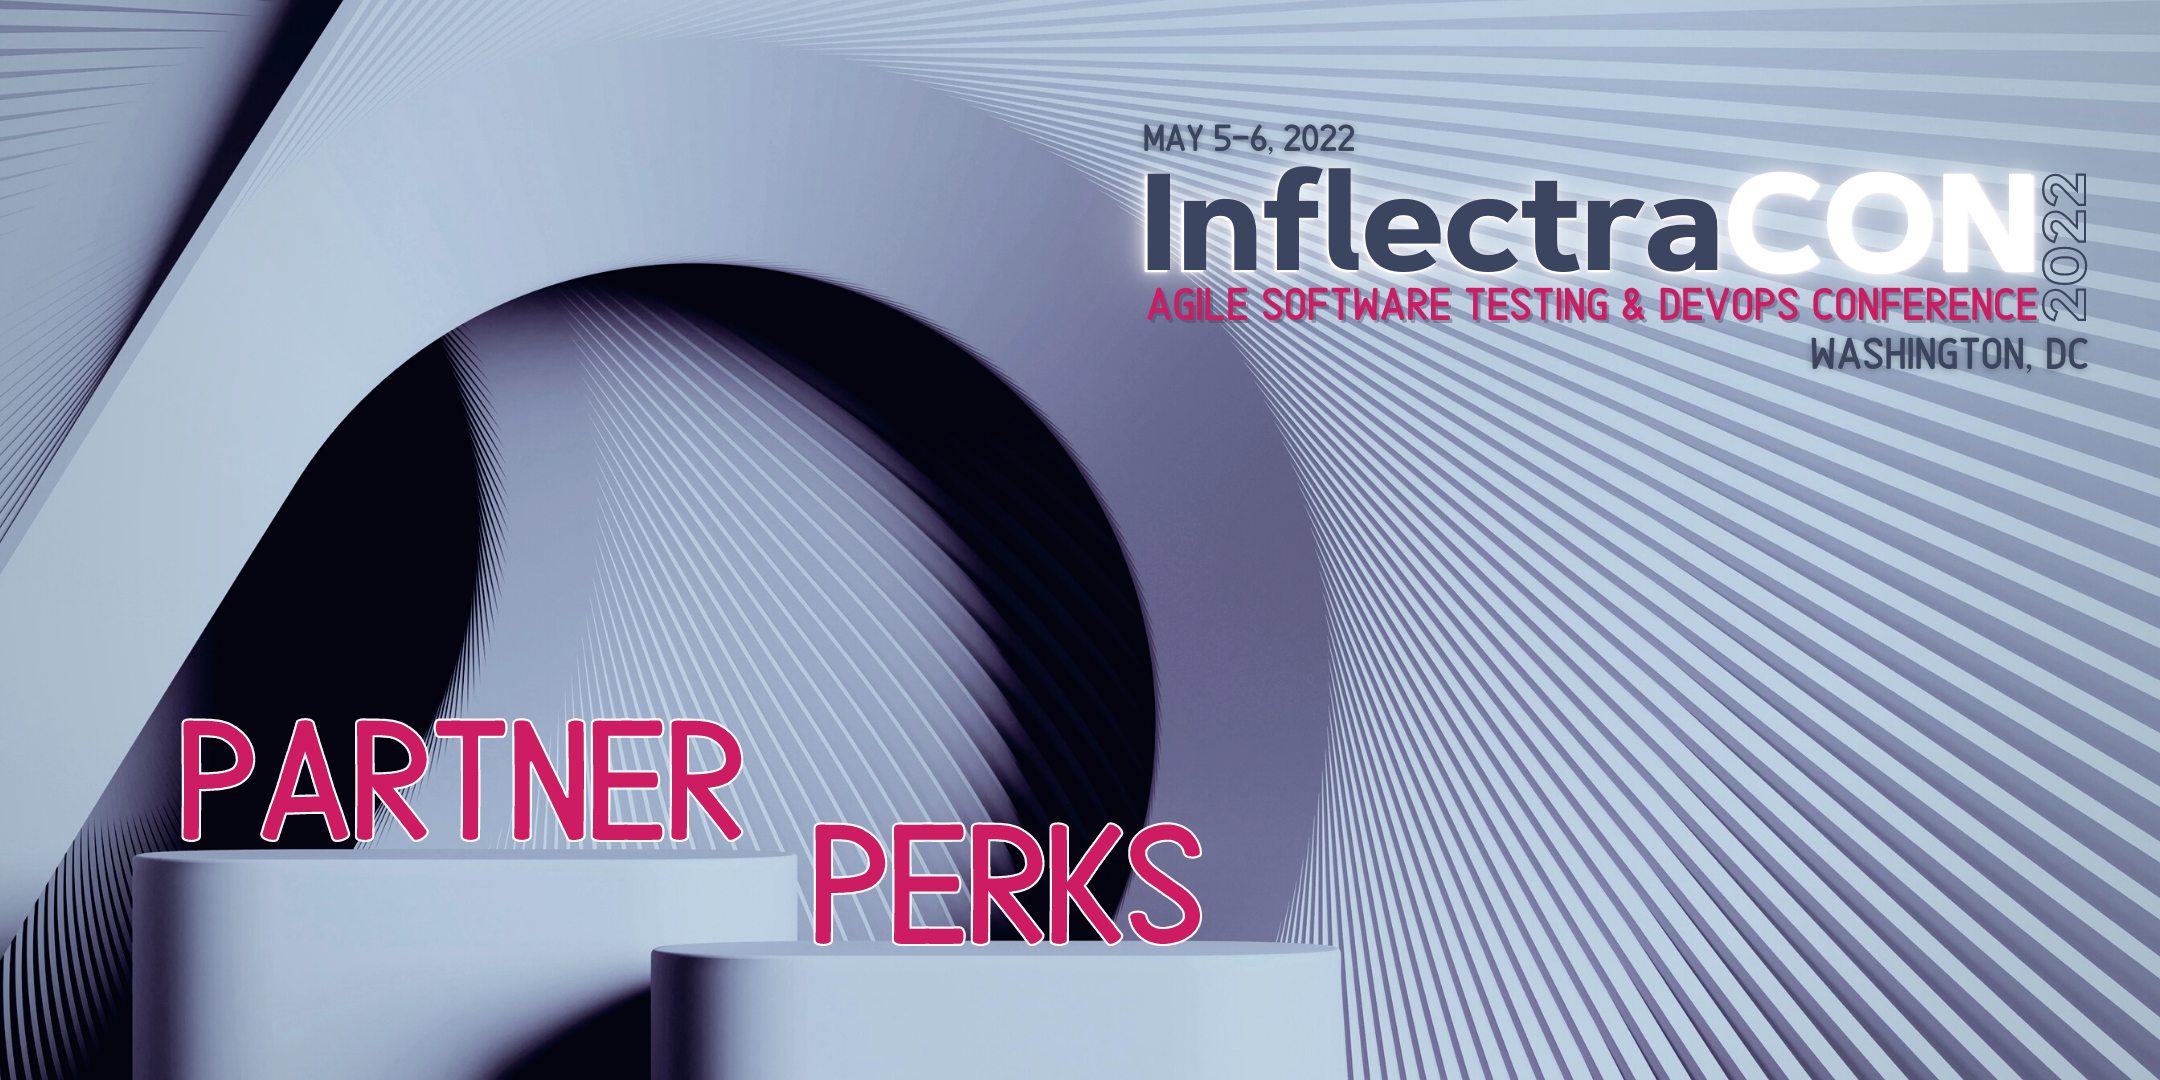 inflectracon-2022-partner-summit-perks-inflectra-image